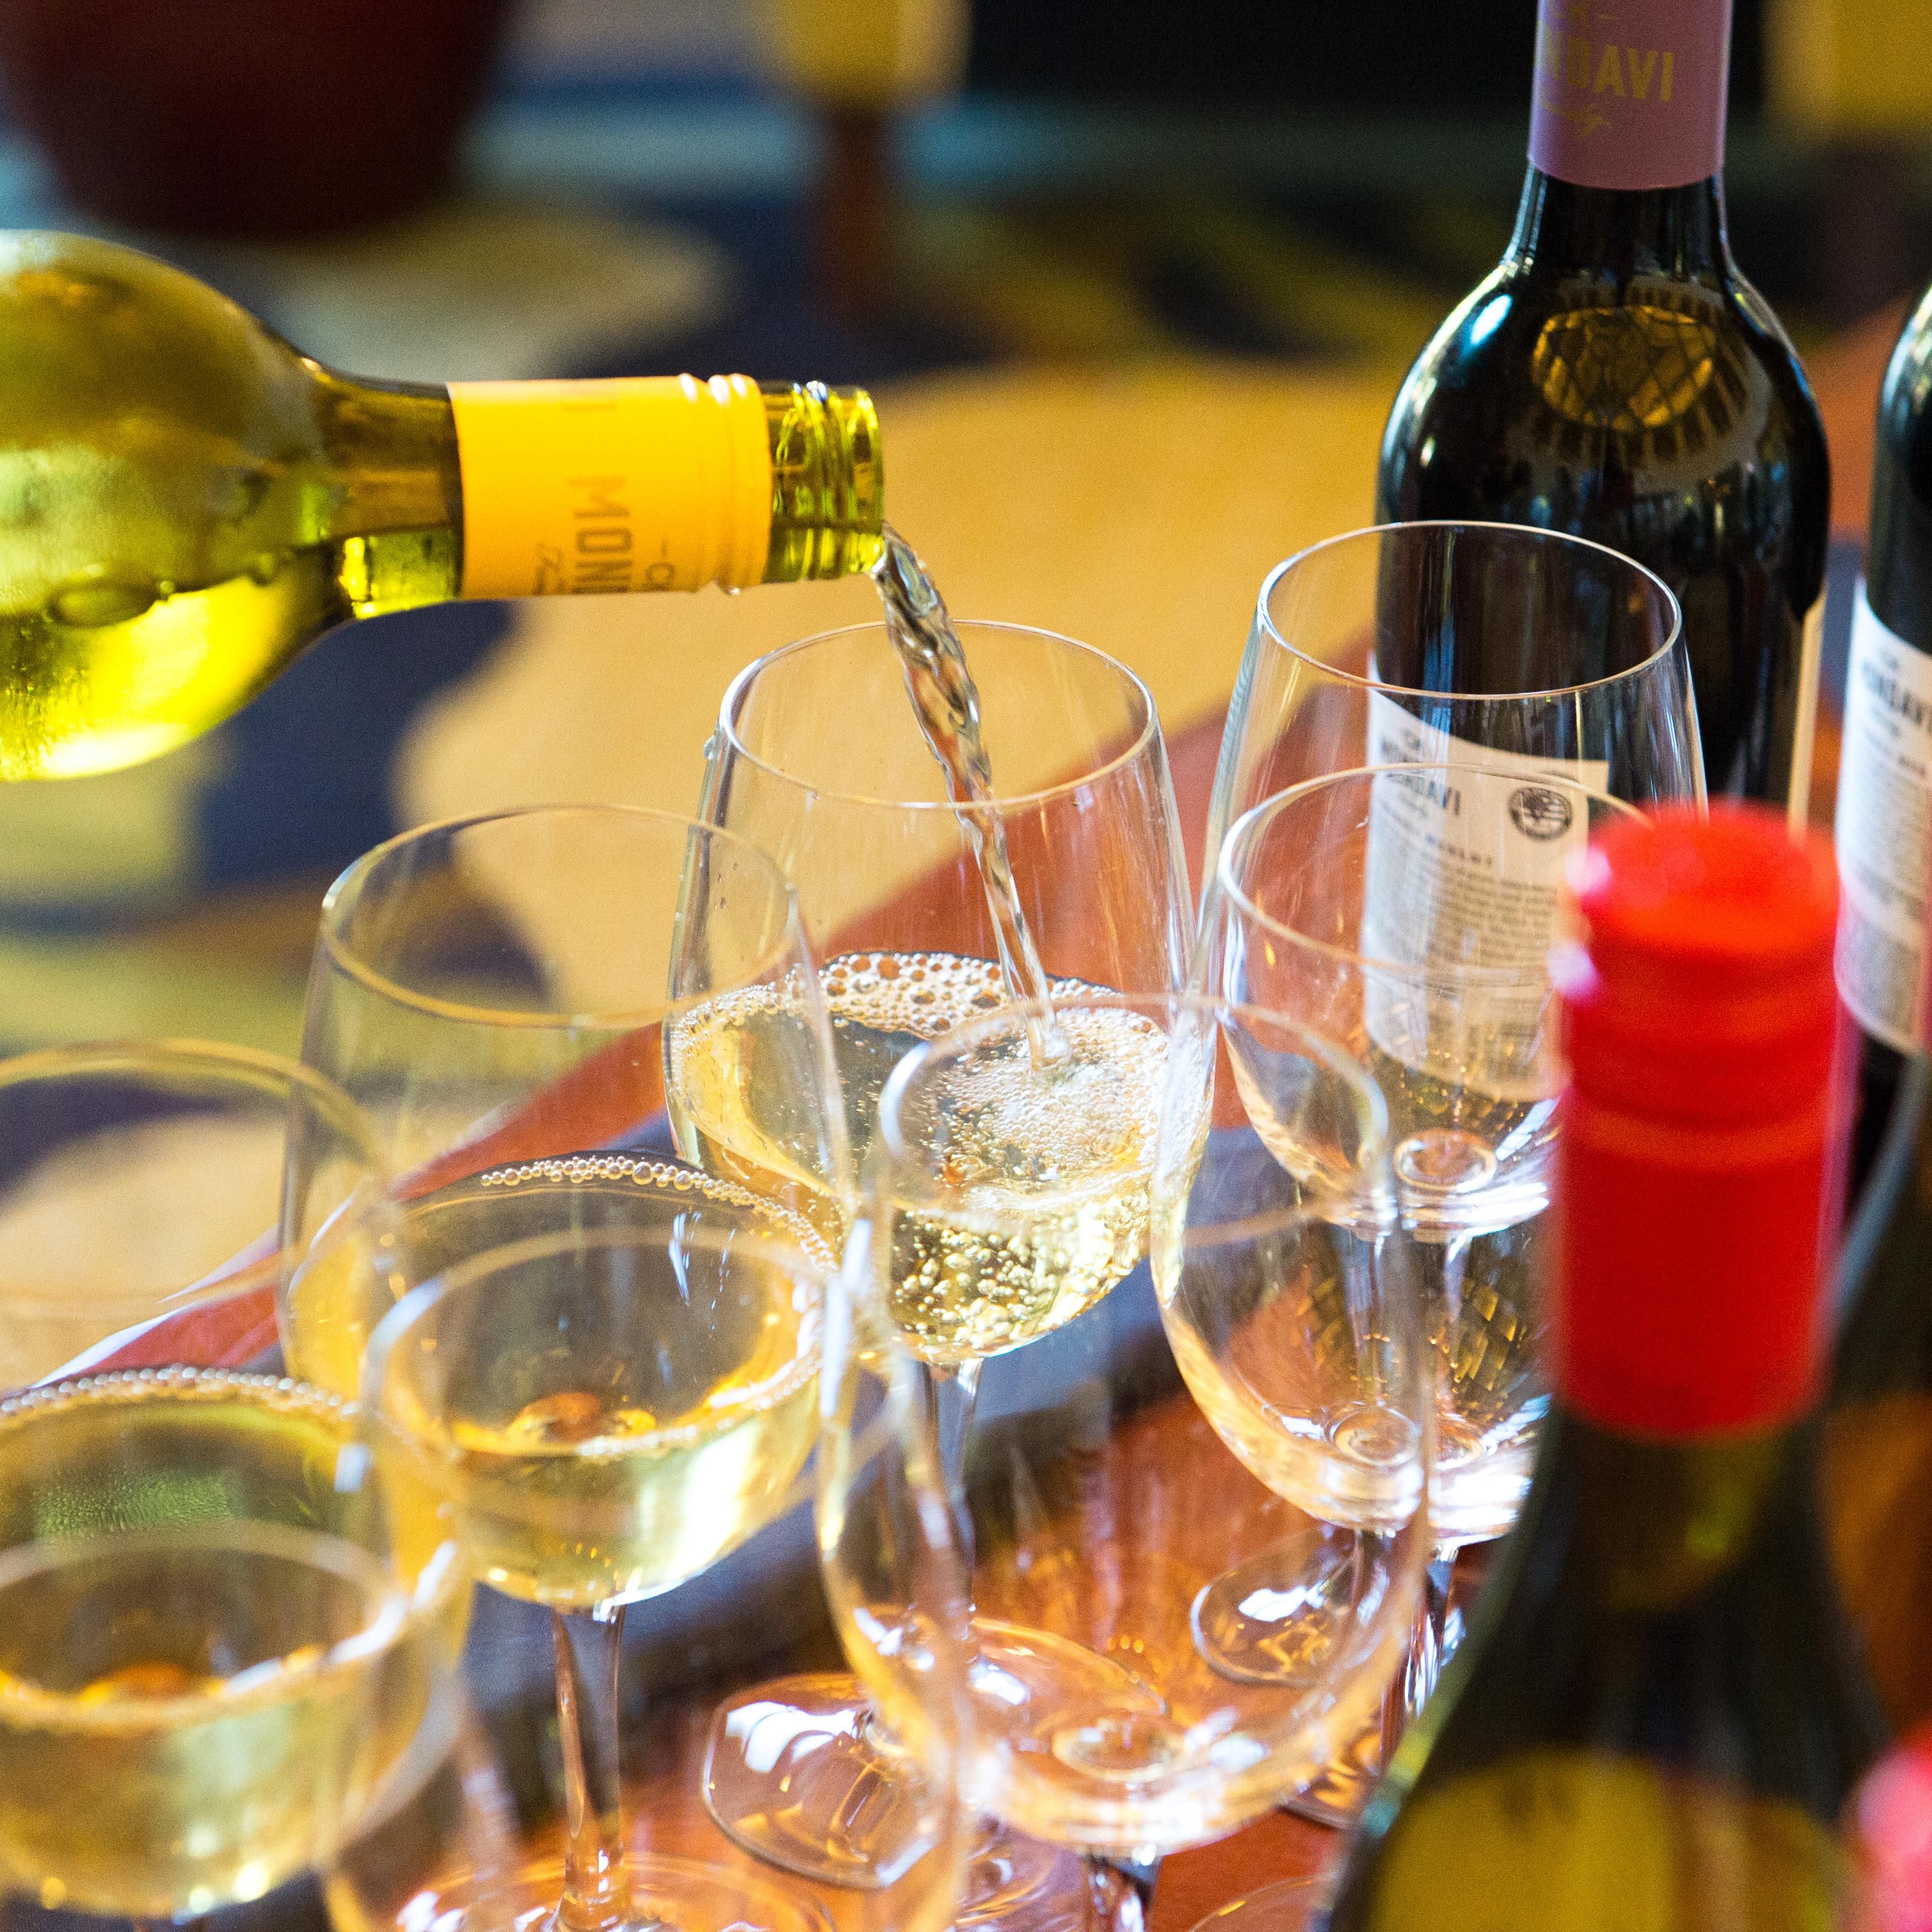 Our extensive selection of wines/beers pair well with any event